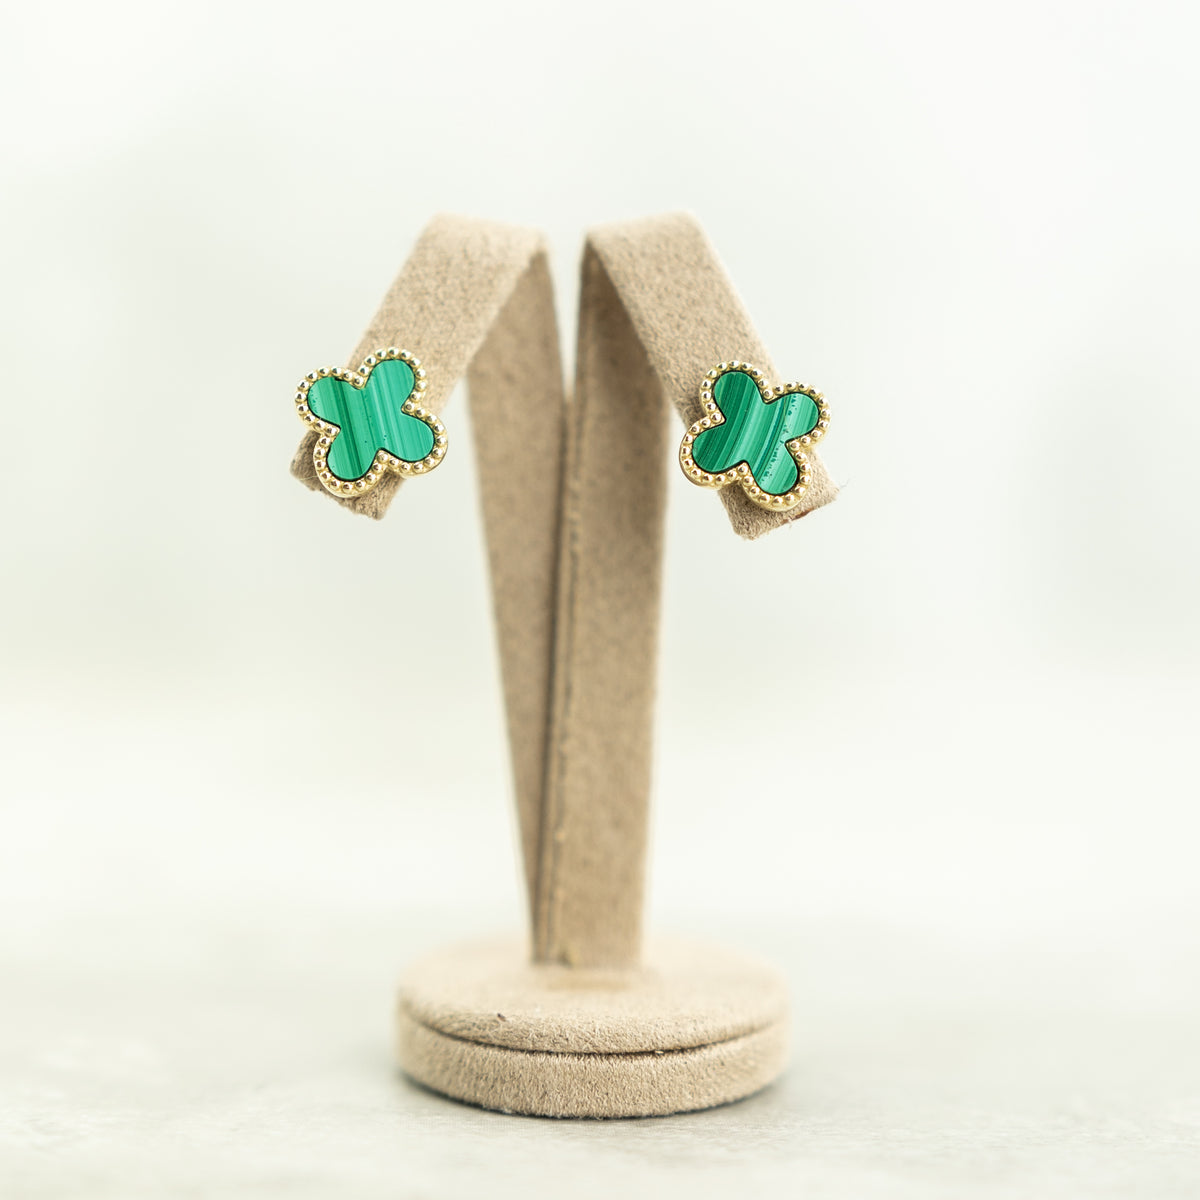 Designer Inspired 9ct Large Yellow Gold Malachite Petal Earrings available at RR Jewellers Yarm